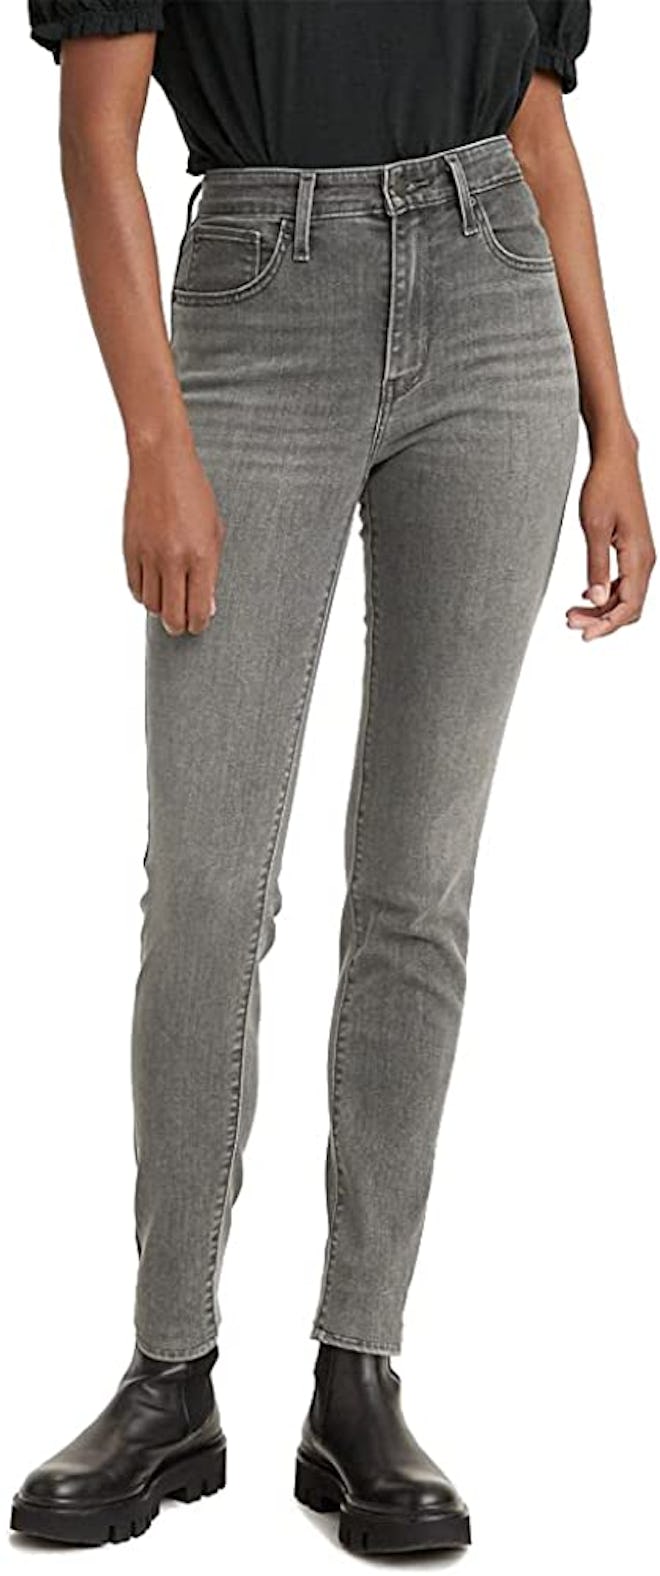 Levi’s 721 High-Rise Skinny Jeans